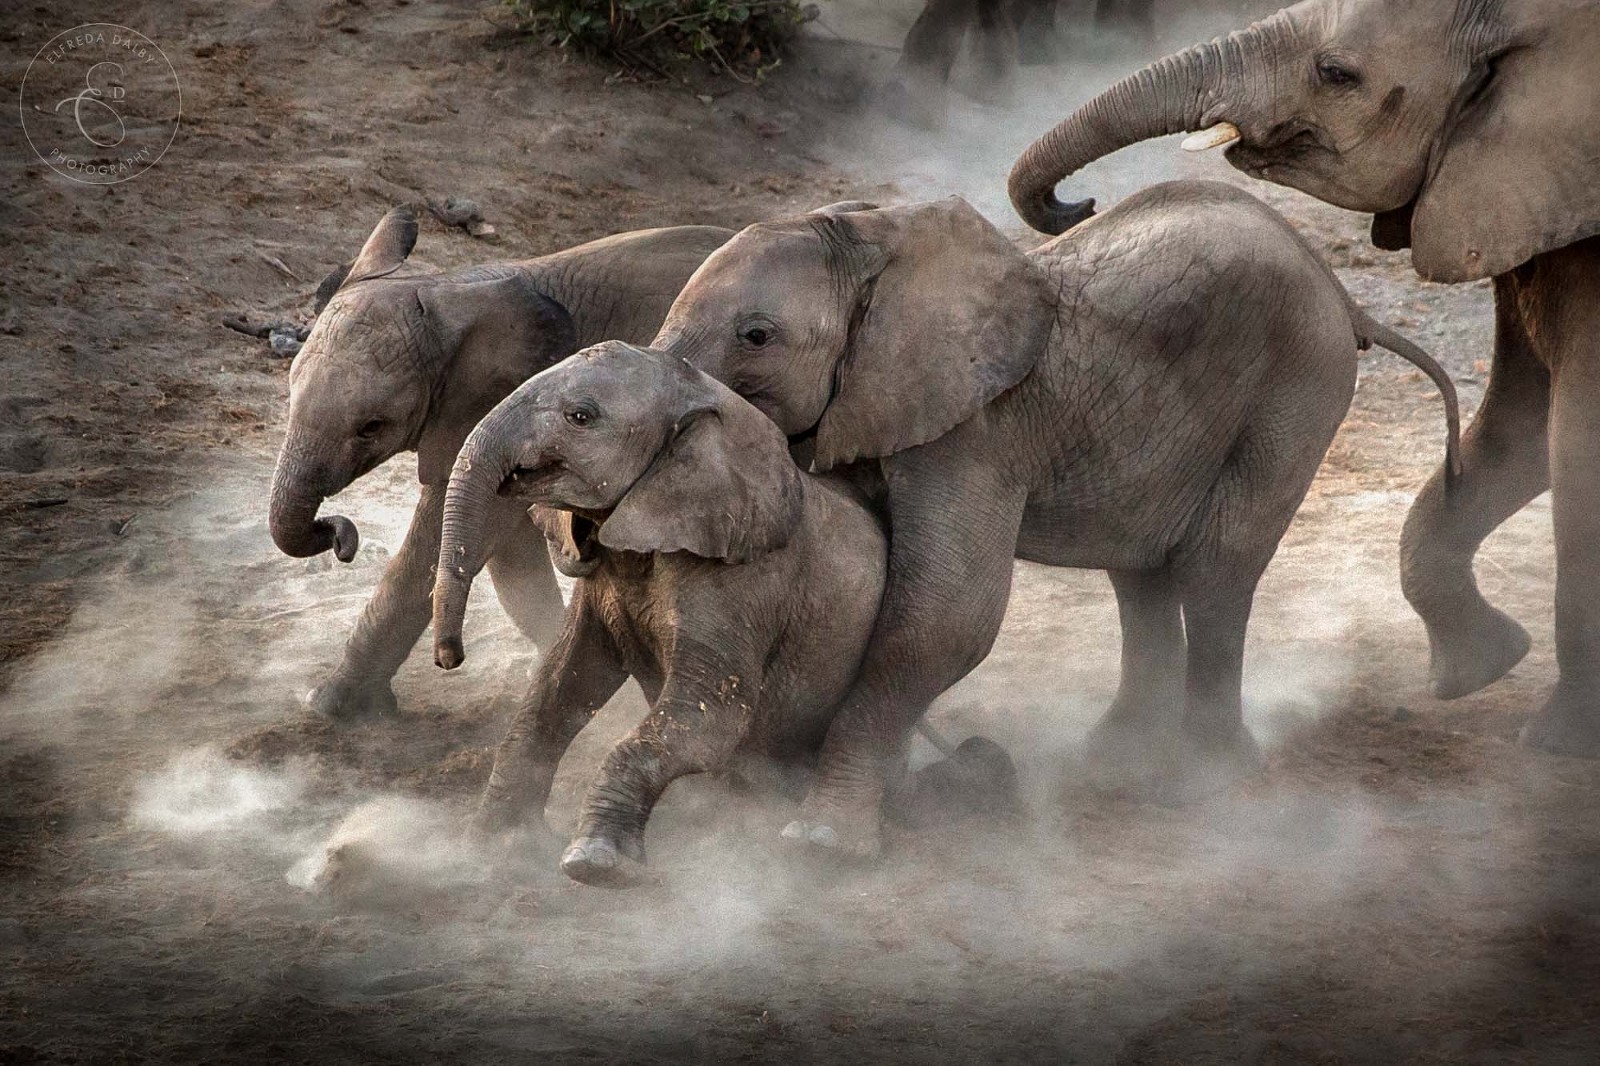 Little elephants playing with dust around them